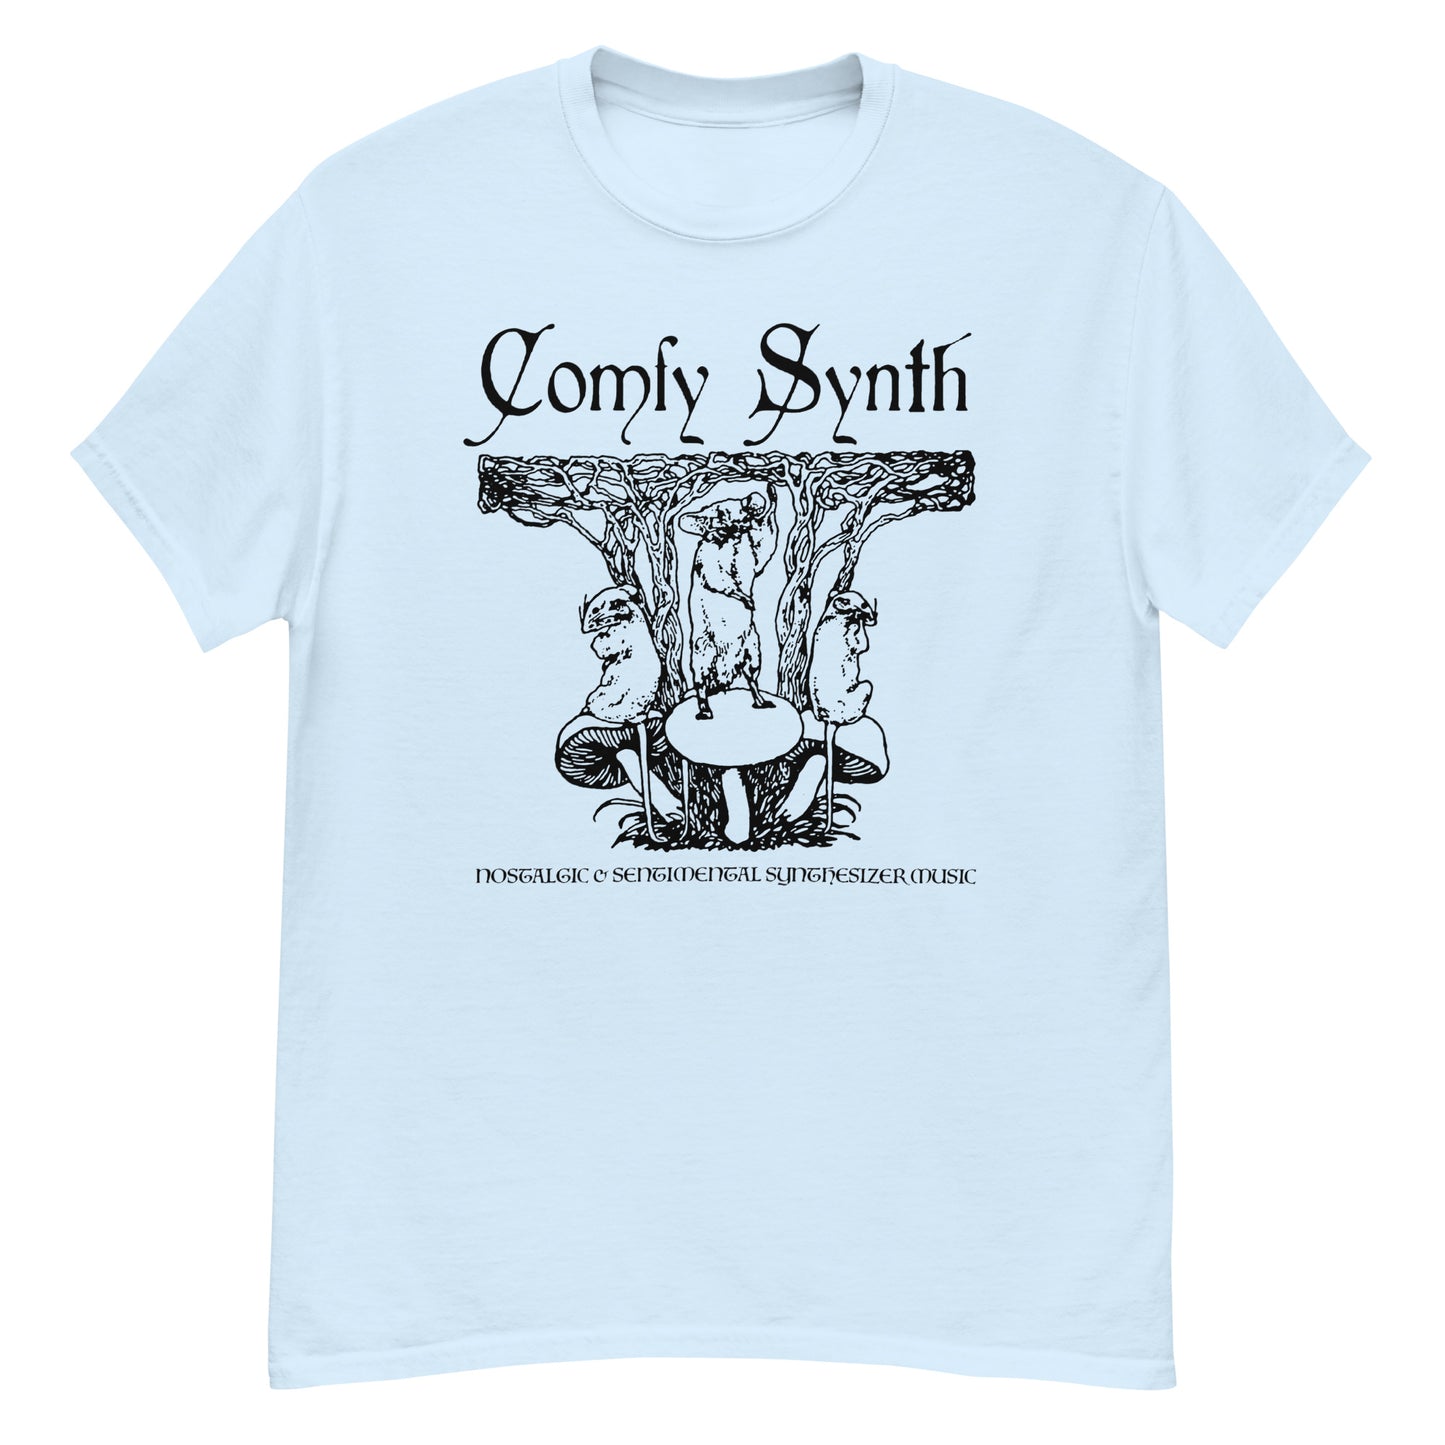 Comfy Synth T-Shirt